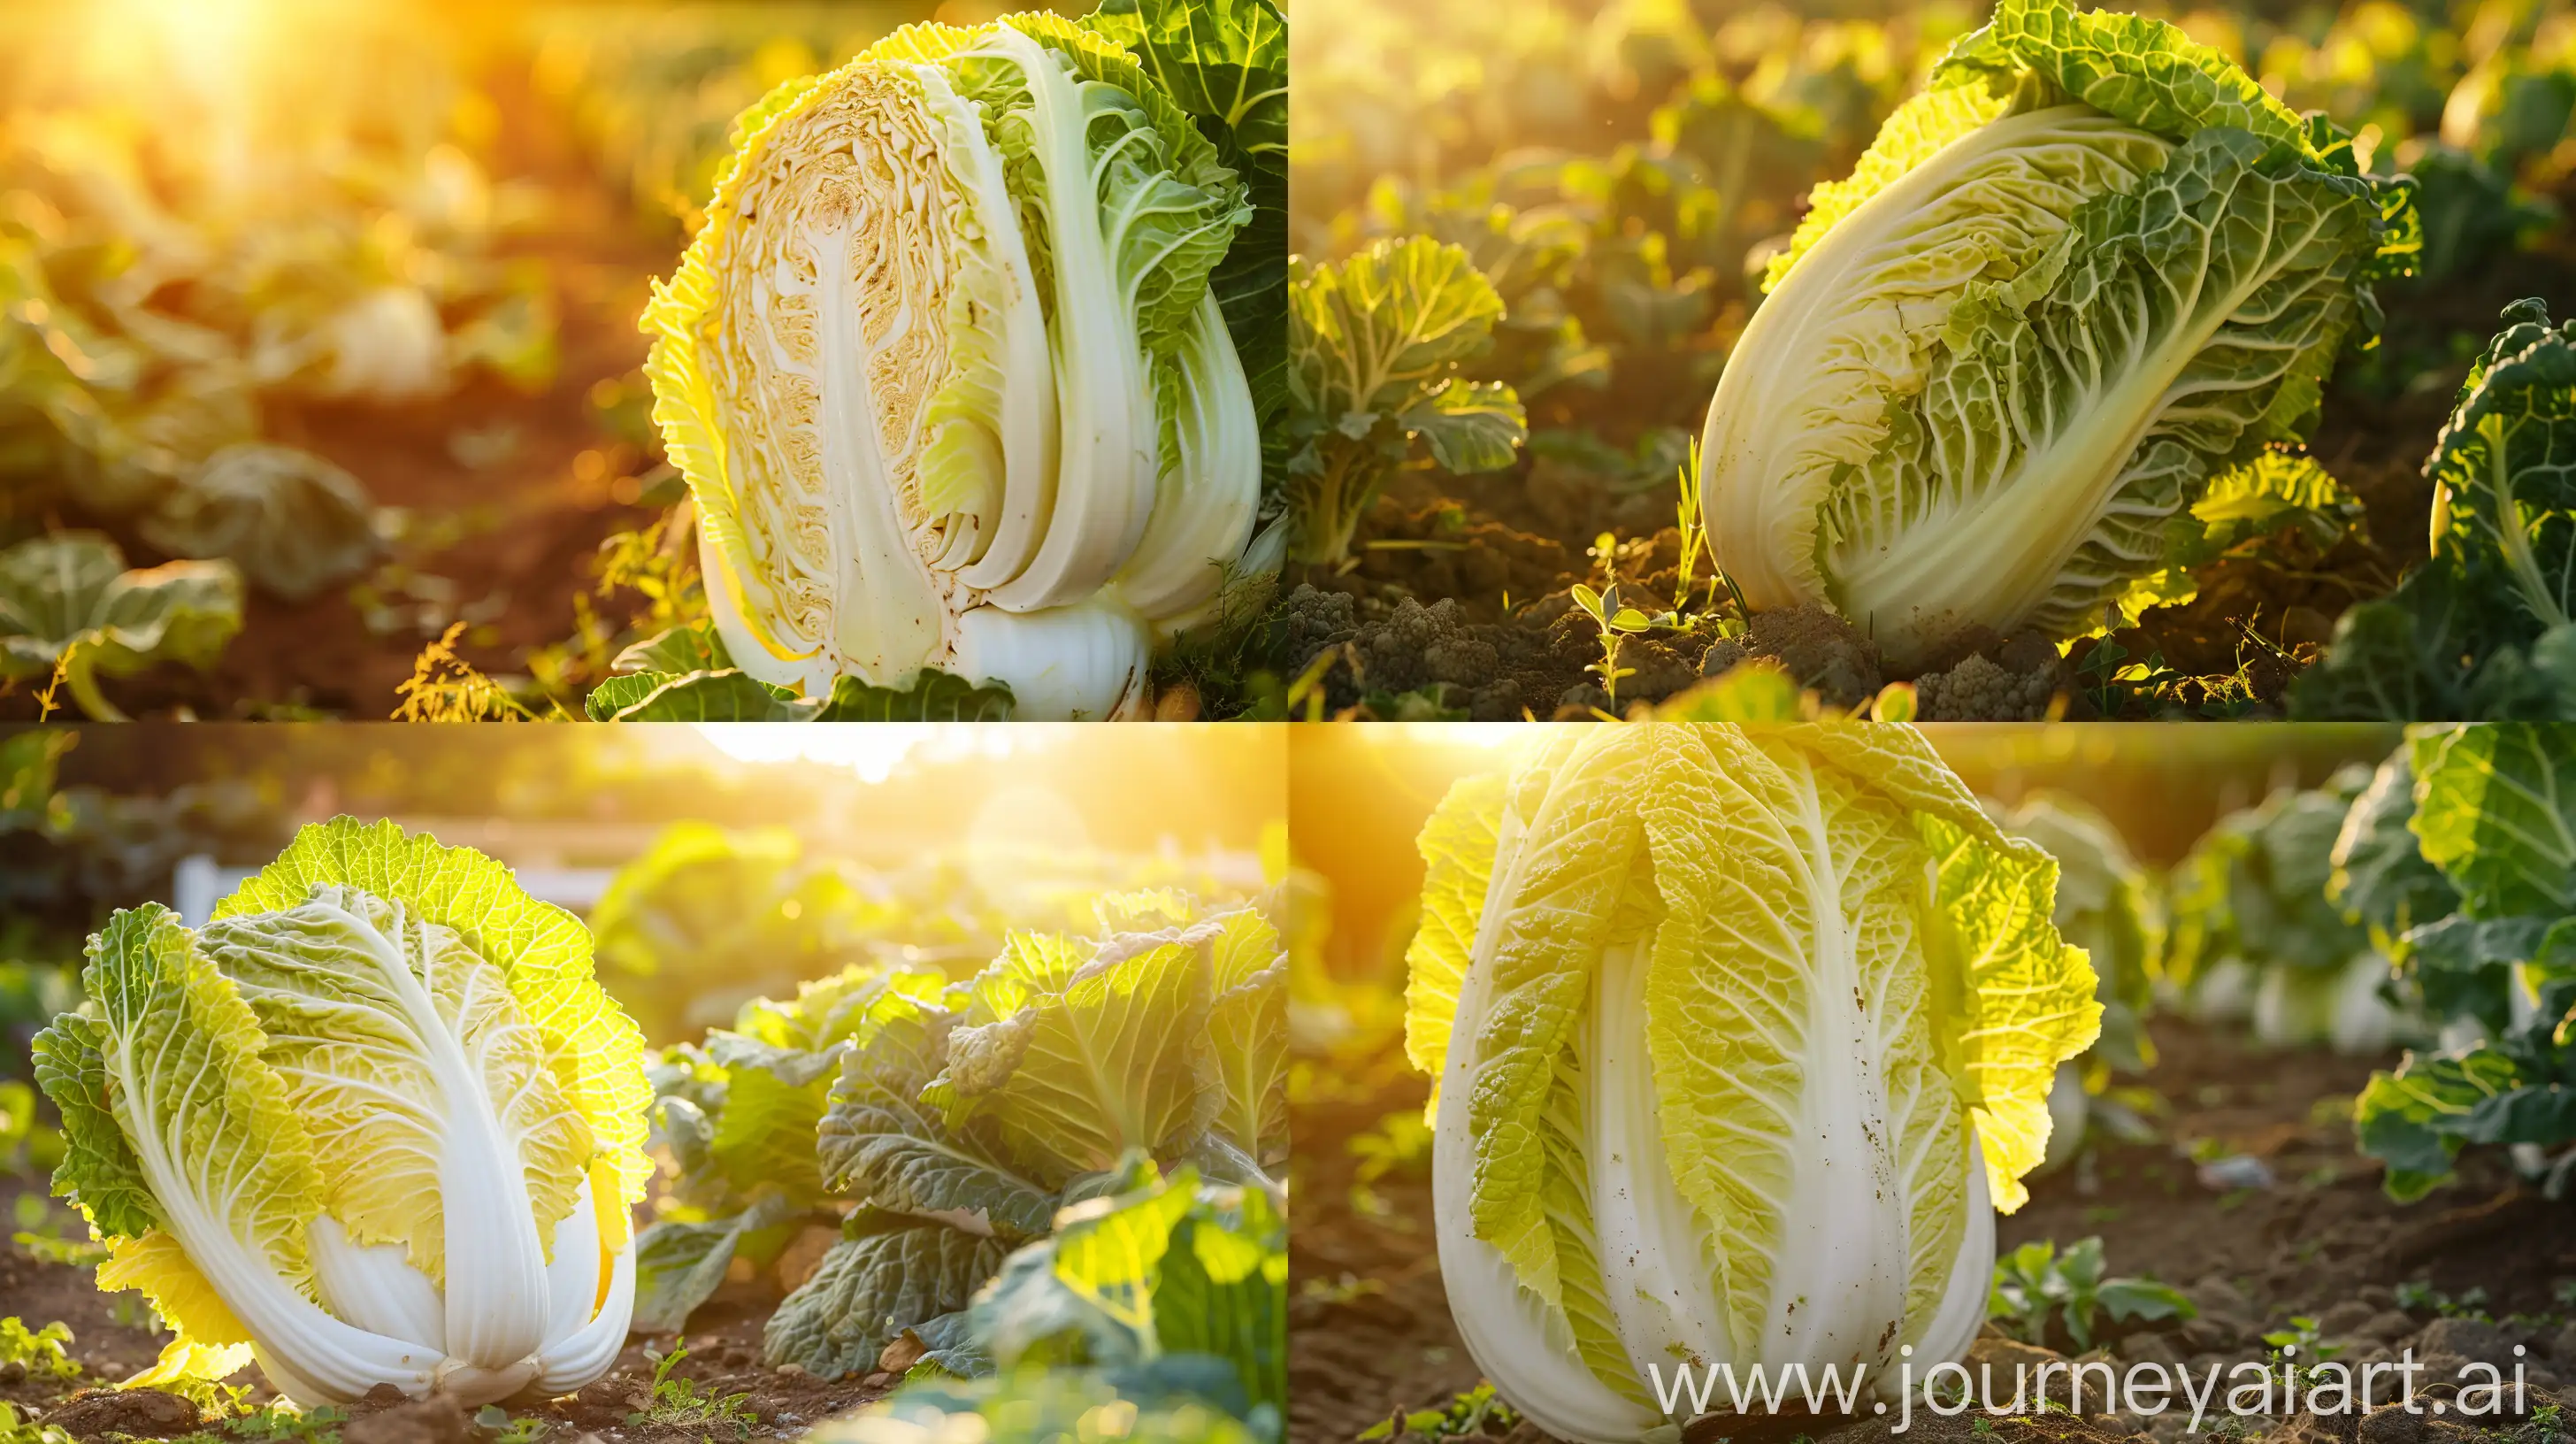 High detailed photo capturing a Cabbage, Napa, Barrel Head Hybrid. The sun, casting a warm, golden glow, bathes the scene in a serene ambiance, illuminating the intricate details of each element. The composition centers on a Cabbage, Napa, Barrel Head Hybrid. Almost twice the size of regular Napa cabbage! An astonishment of color, extra-large 4½ lb. cylindrical heads are jam-packed with crispy, white-ribbed, pale-green outer leaves and yellow inner leaves; one huge barrel of subtle, refreshing cabbage flavor.. The image evokes a sense of tranquility and natural beauty, inviting viewers to immerse themselves in the splendor of the landscape. --ar 16:9 